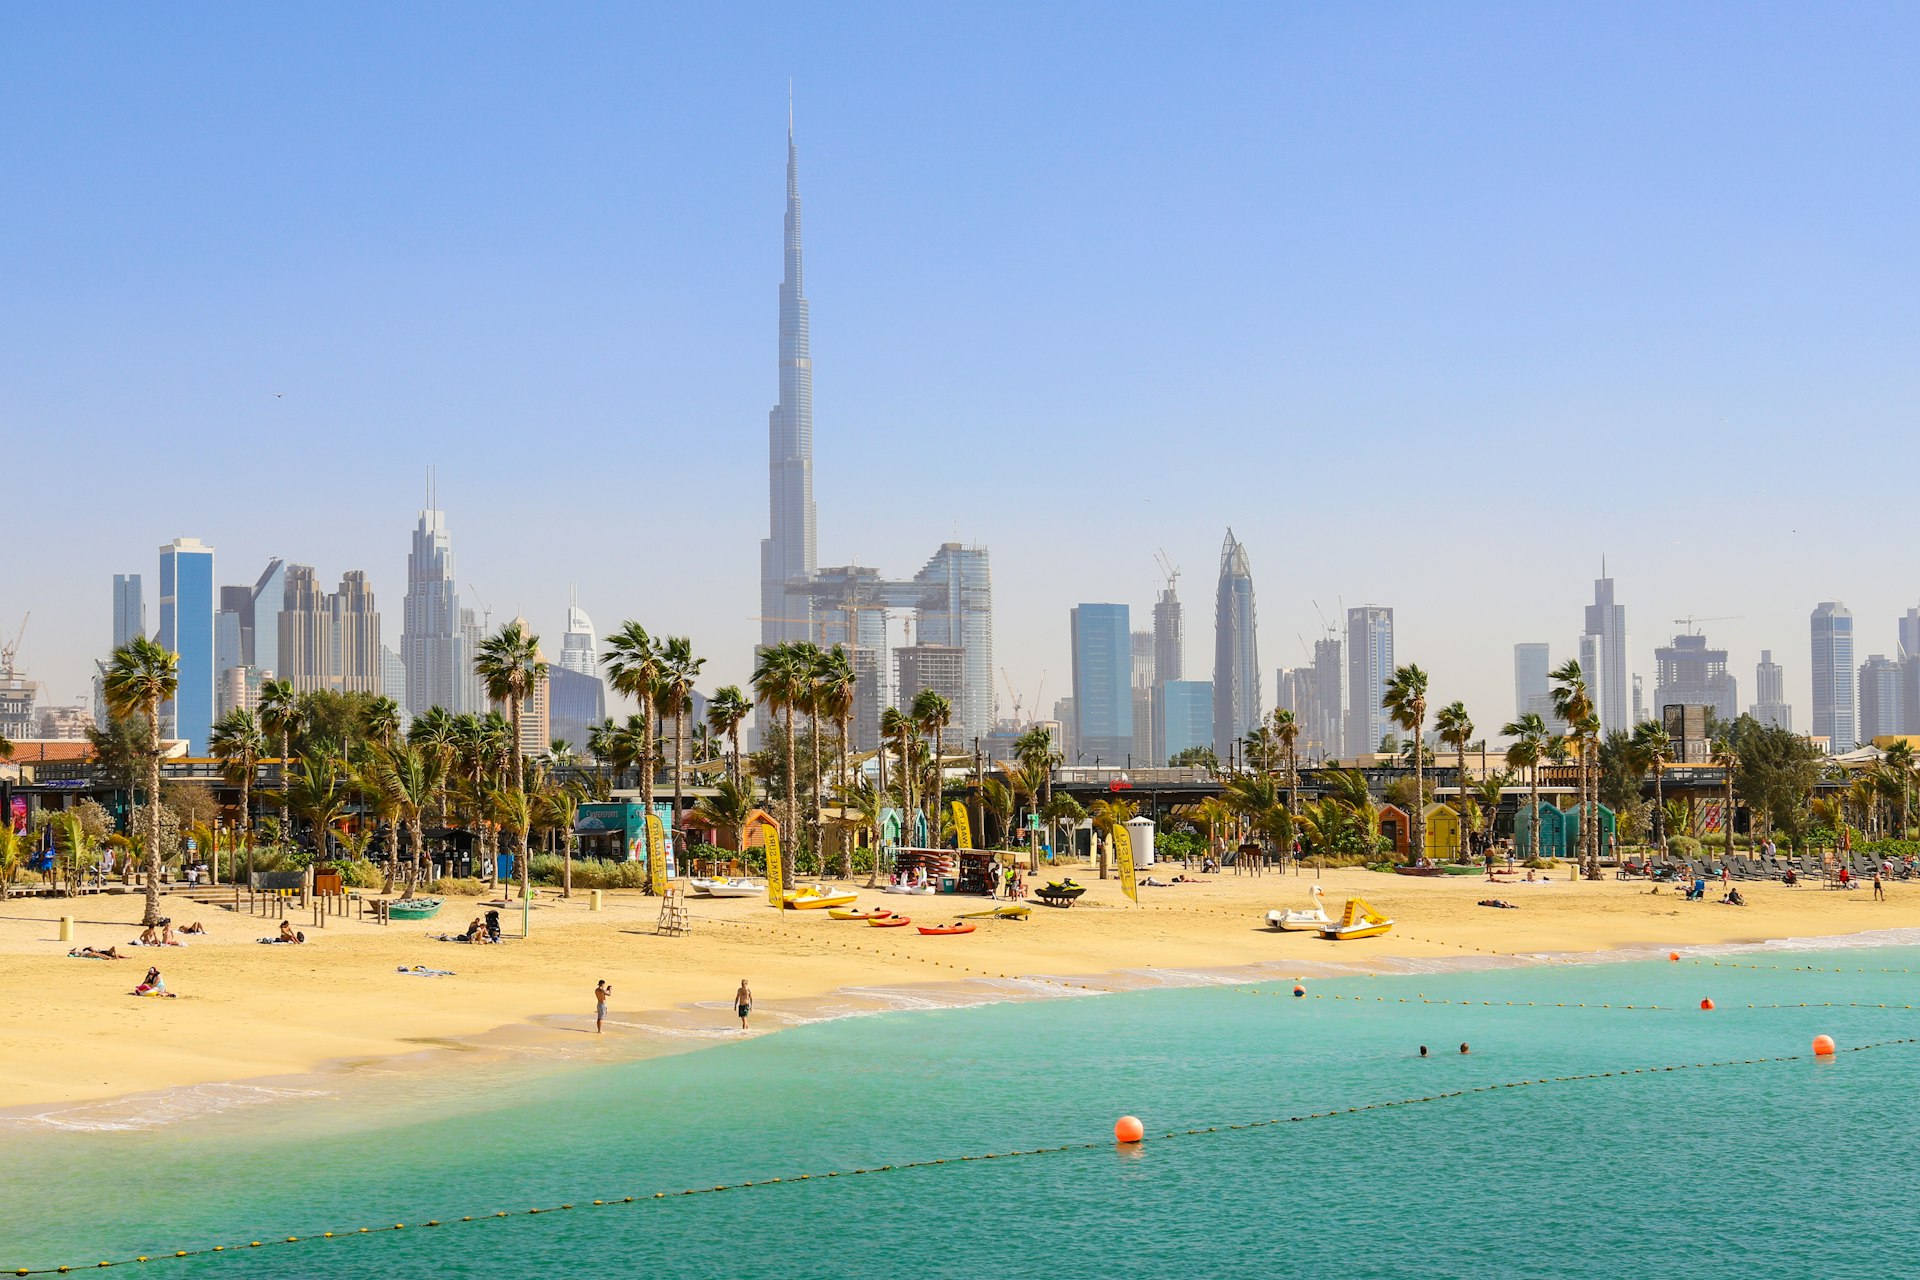 People at La Mer Beach with skyscrapers of Dubai in the background